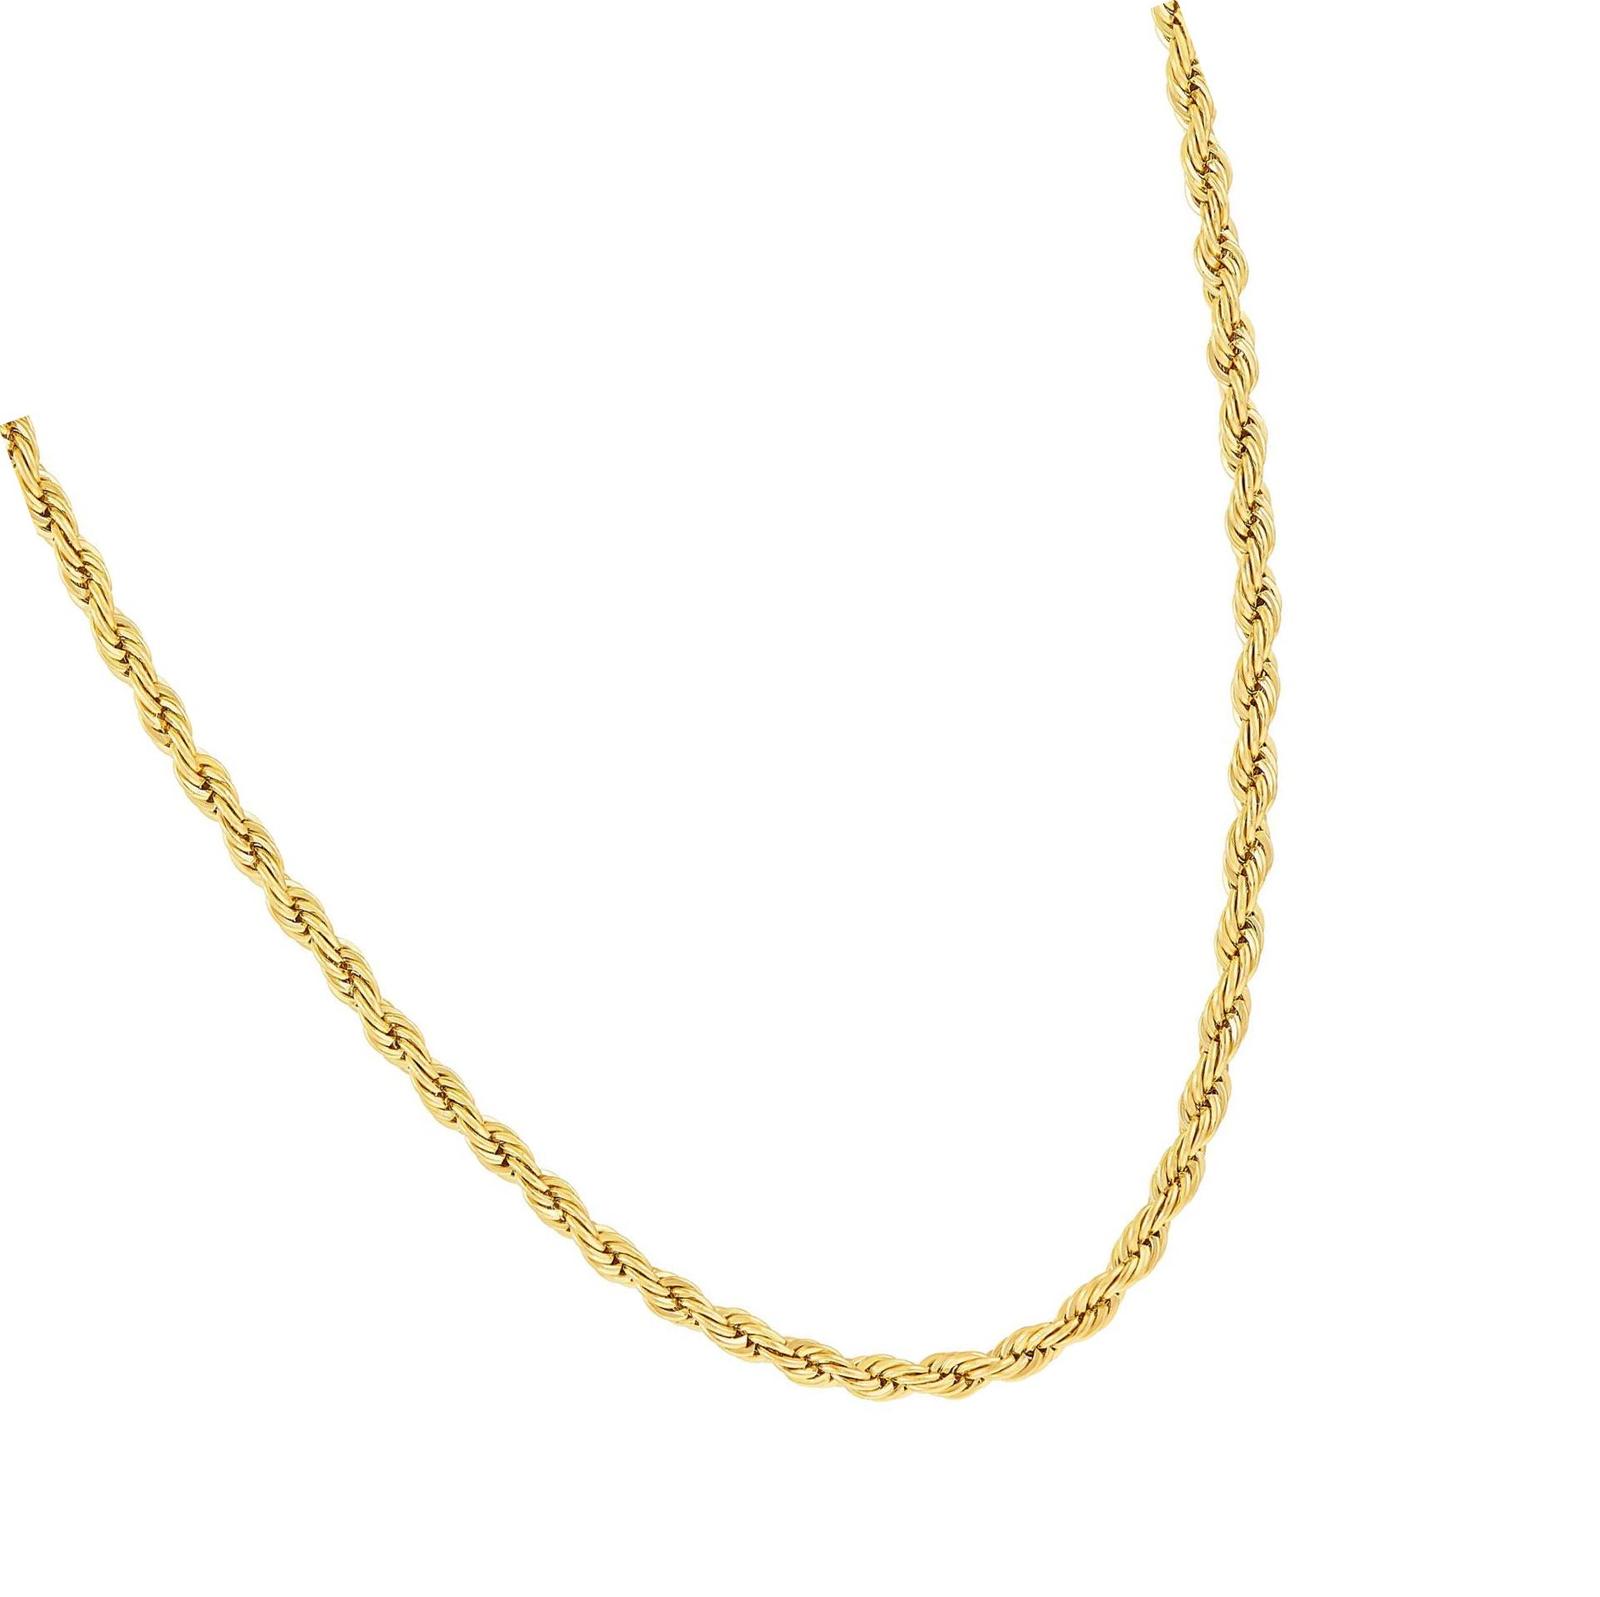 Primary image for JEWELRY 2mm Rope Chain Necklace 24k Real Gold for